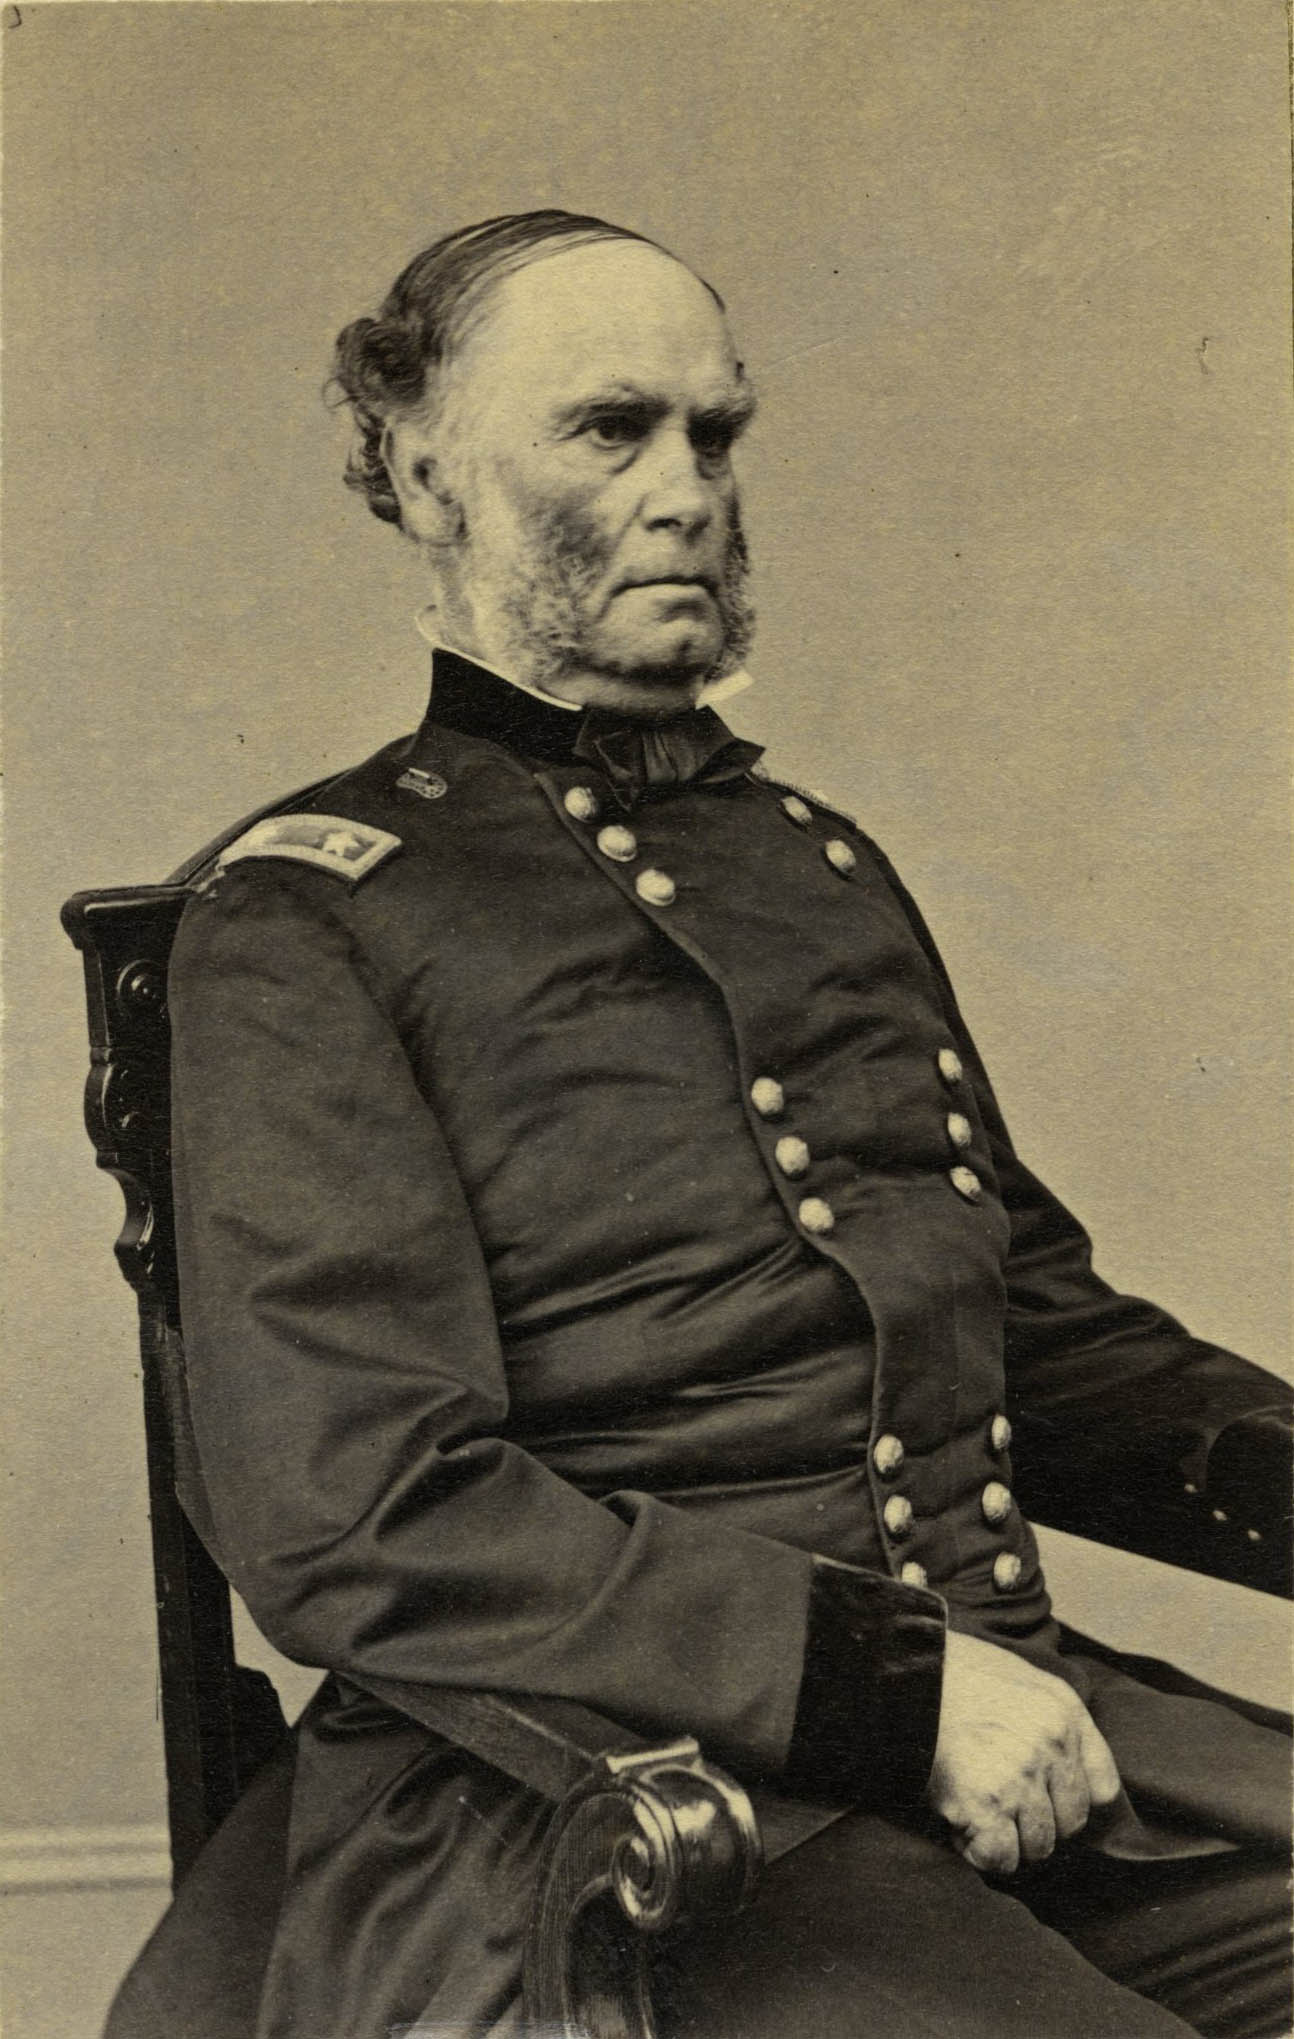 Samuel R. Curtis sitting in uniform. View from side.